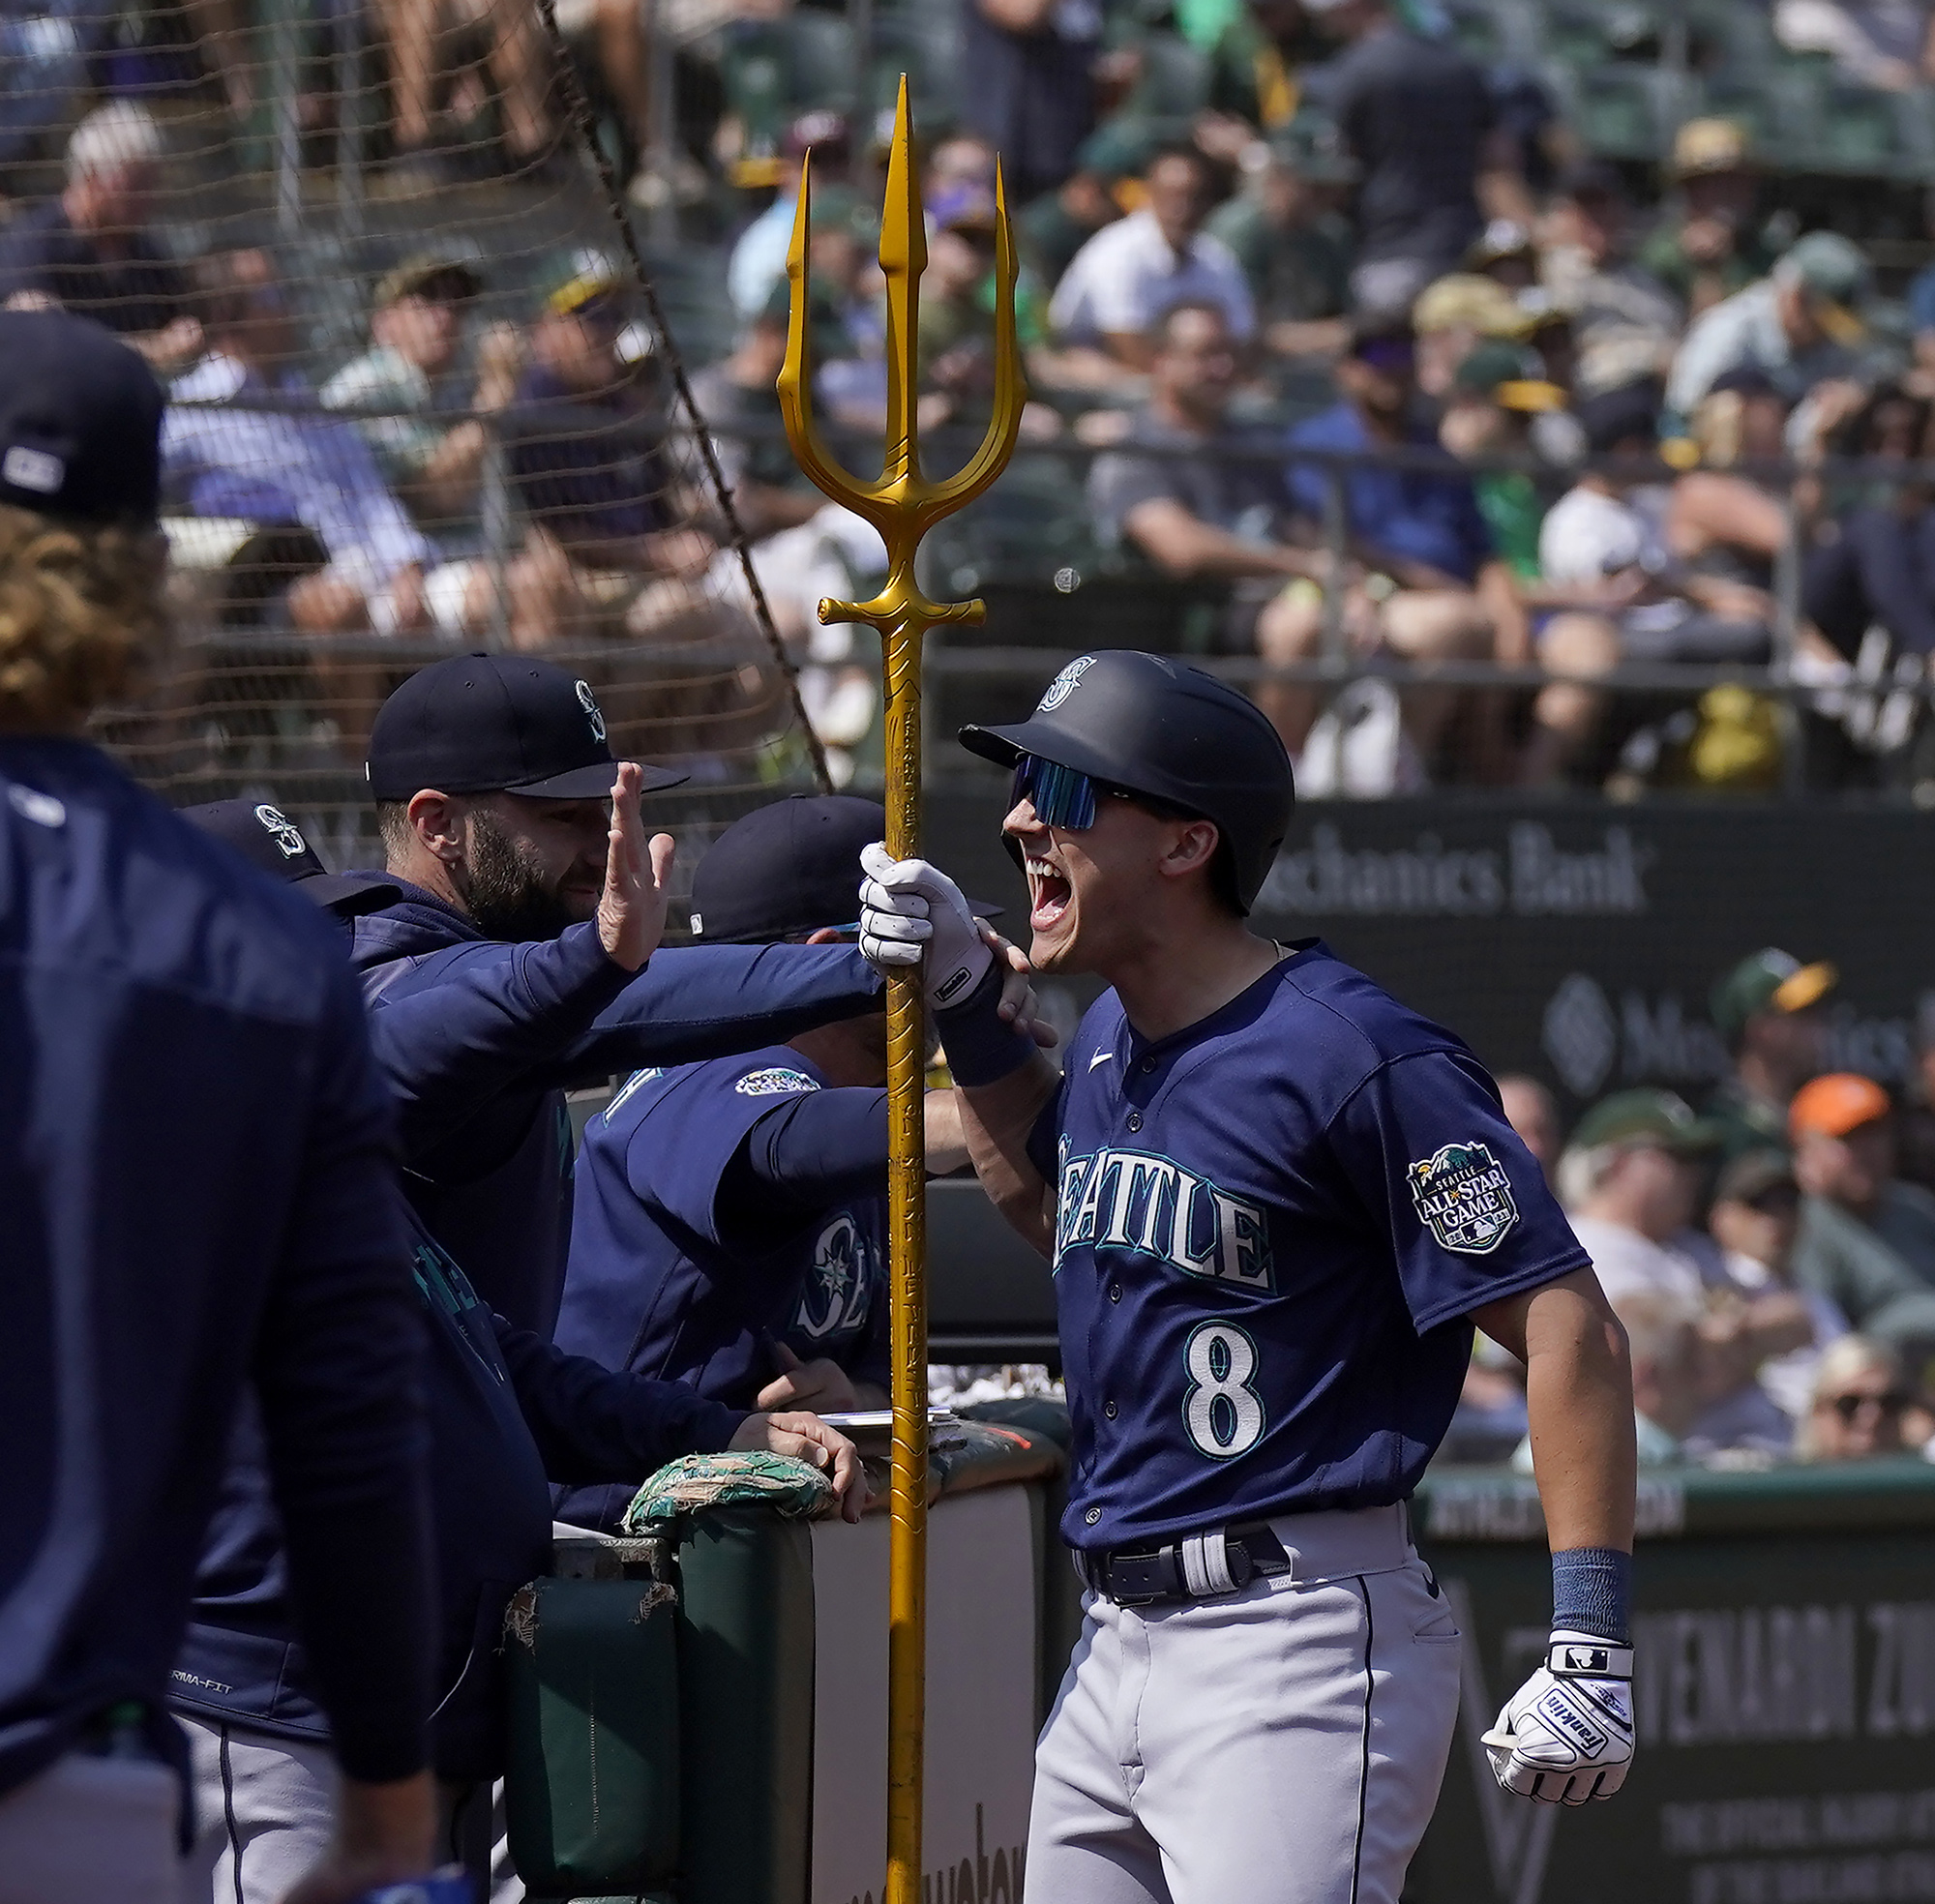 Mariners beat the A's 6-3 to keep pace with rivals